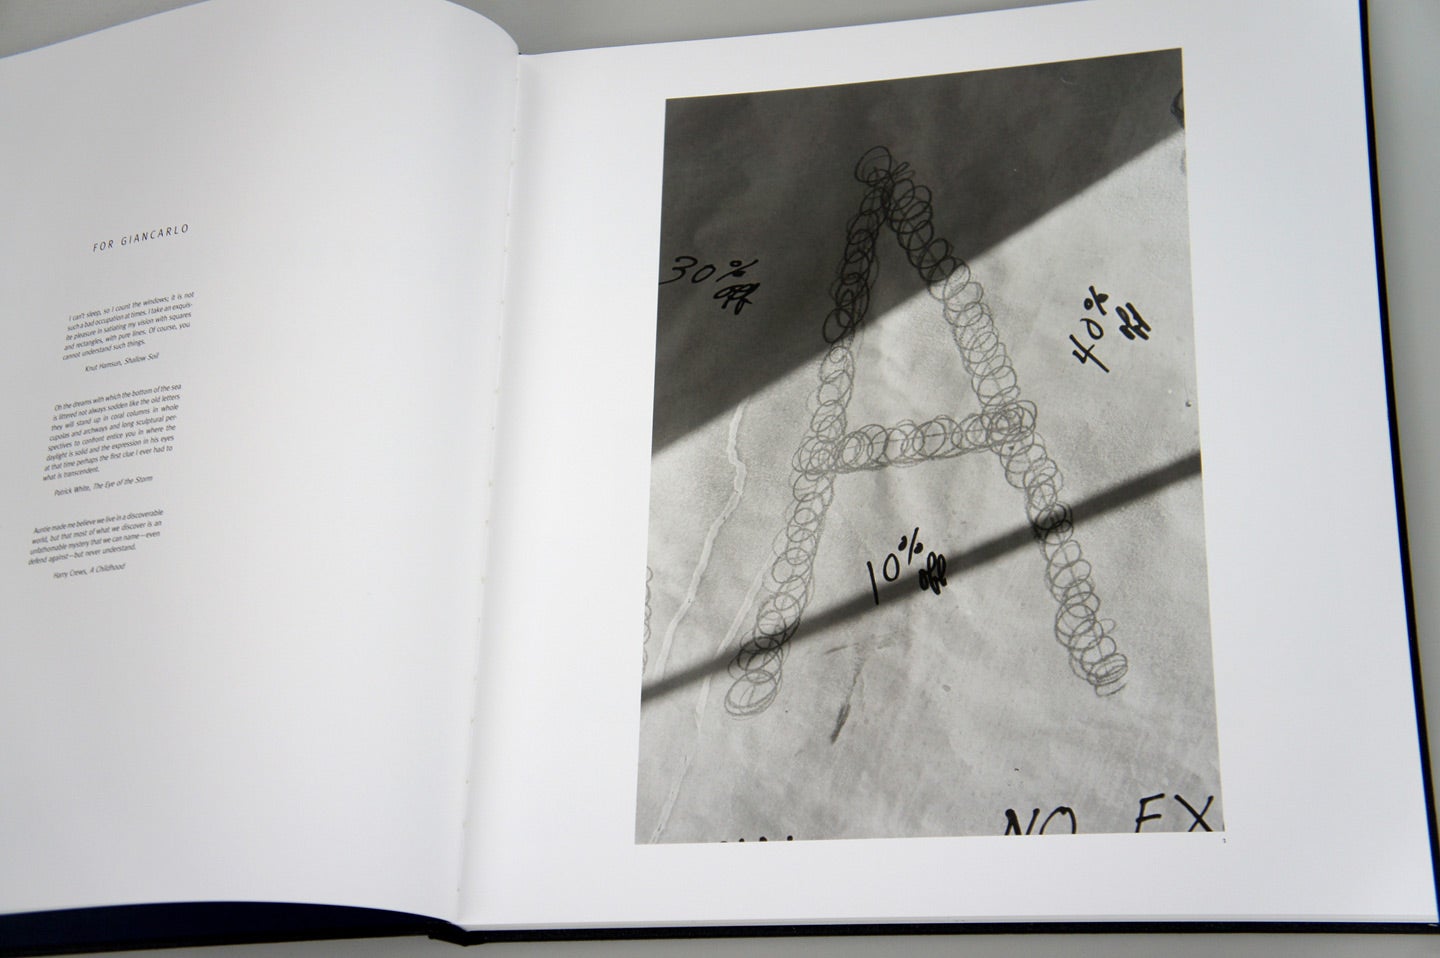 Lee Friedlander: Letters from the People (Special Limited Edition with One Vintage Gelatin Silver Print: "M")